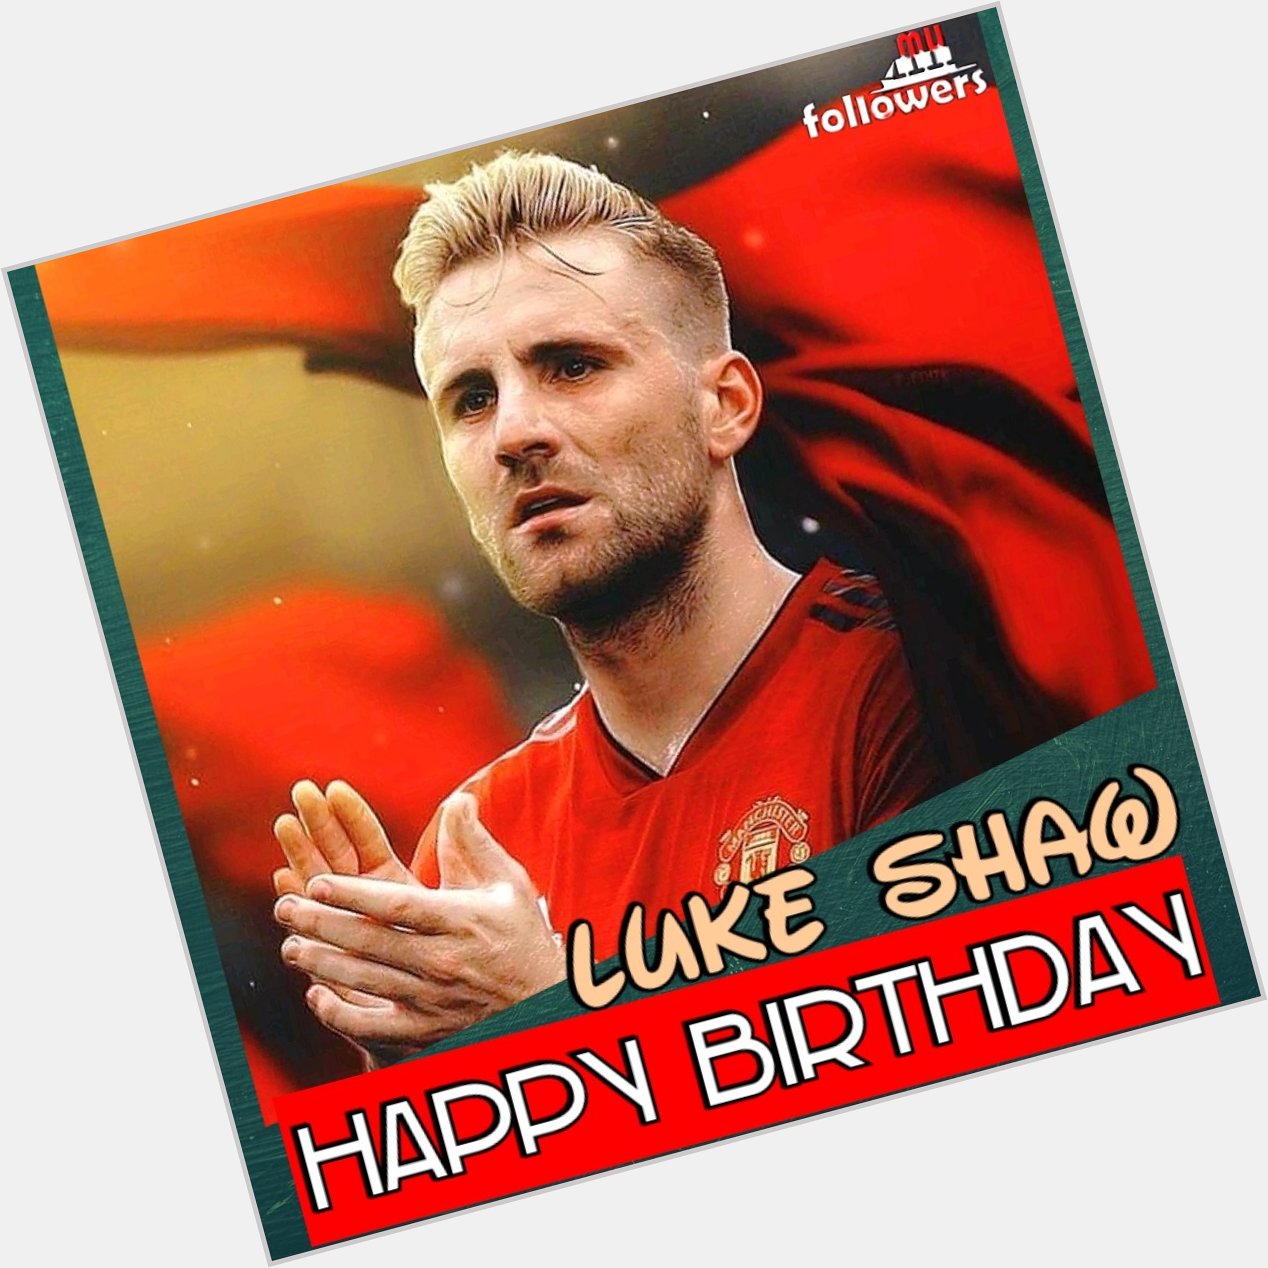 Happy birthday Luke Shaw....
Cheers Get, your wishes in reds..  